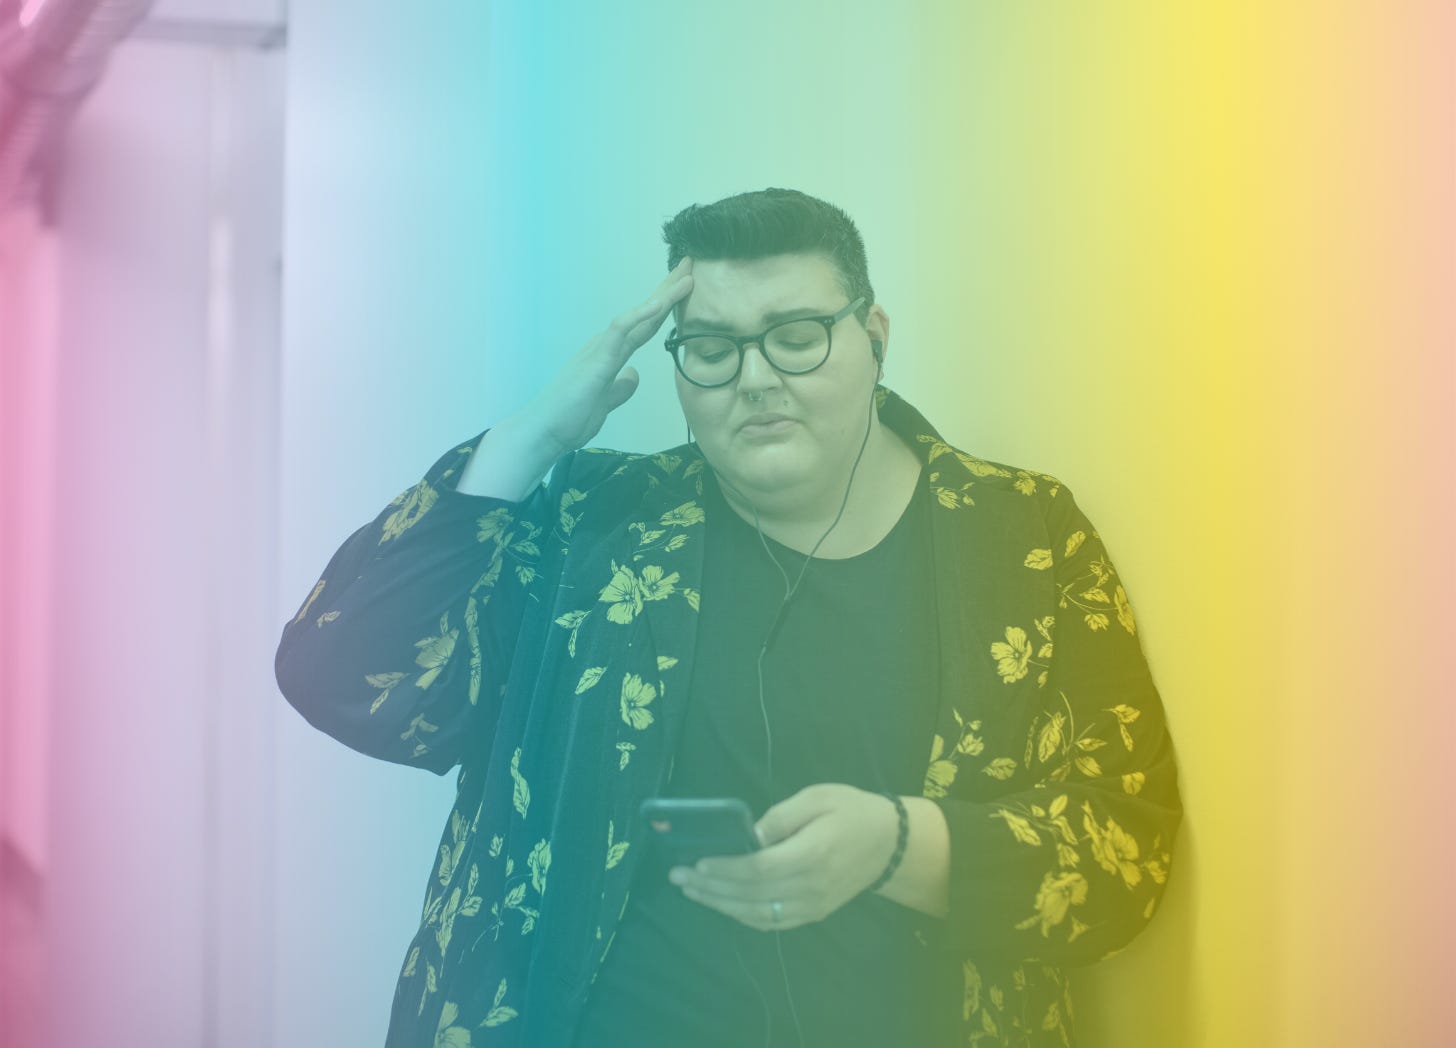 A rainbow-filtered image of a fat, nonbinary individual holding a phone in one hand while grimacing and putting their other hand to their temple